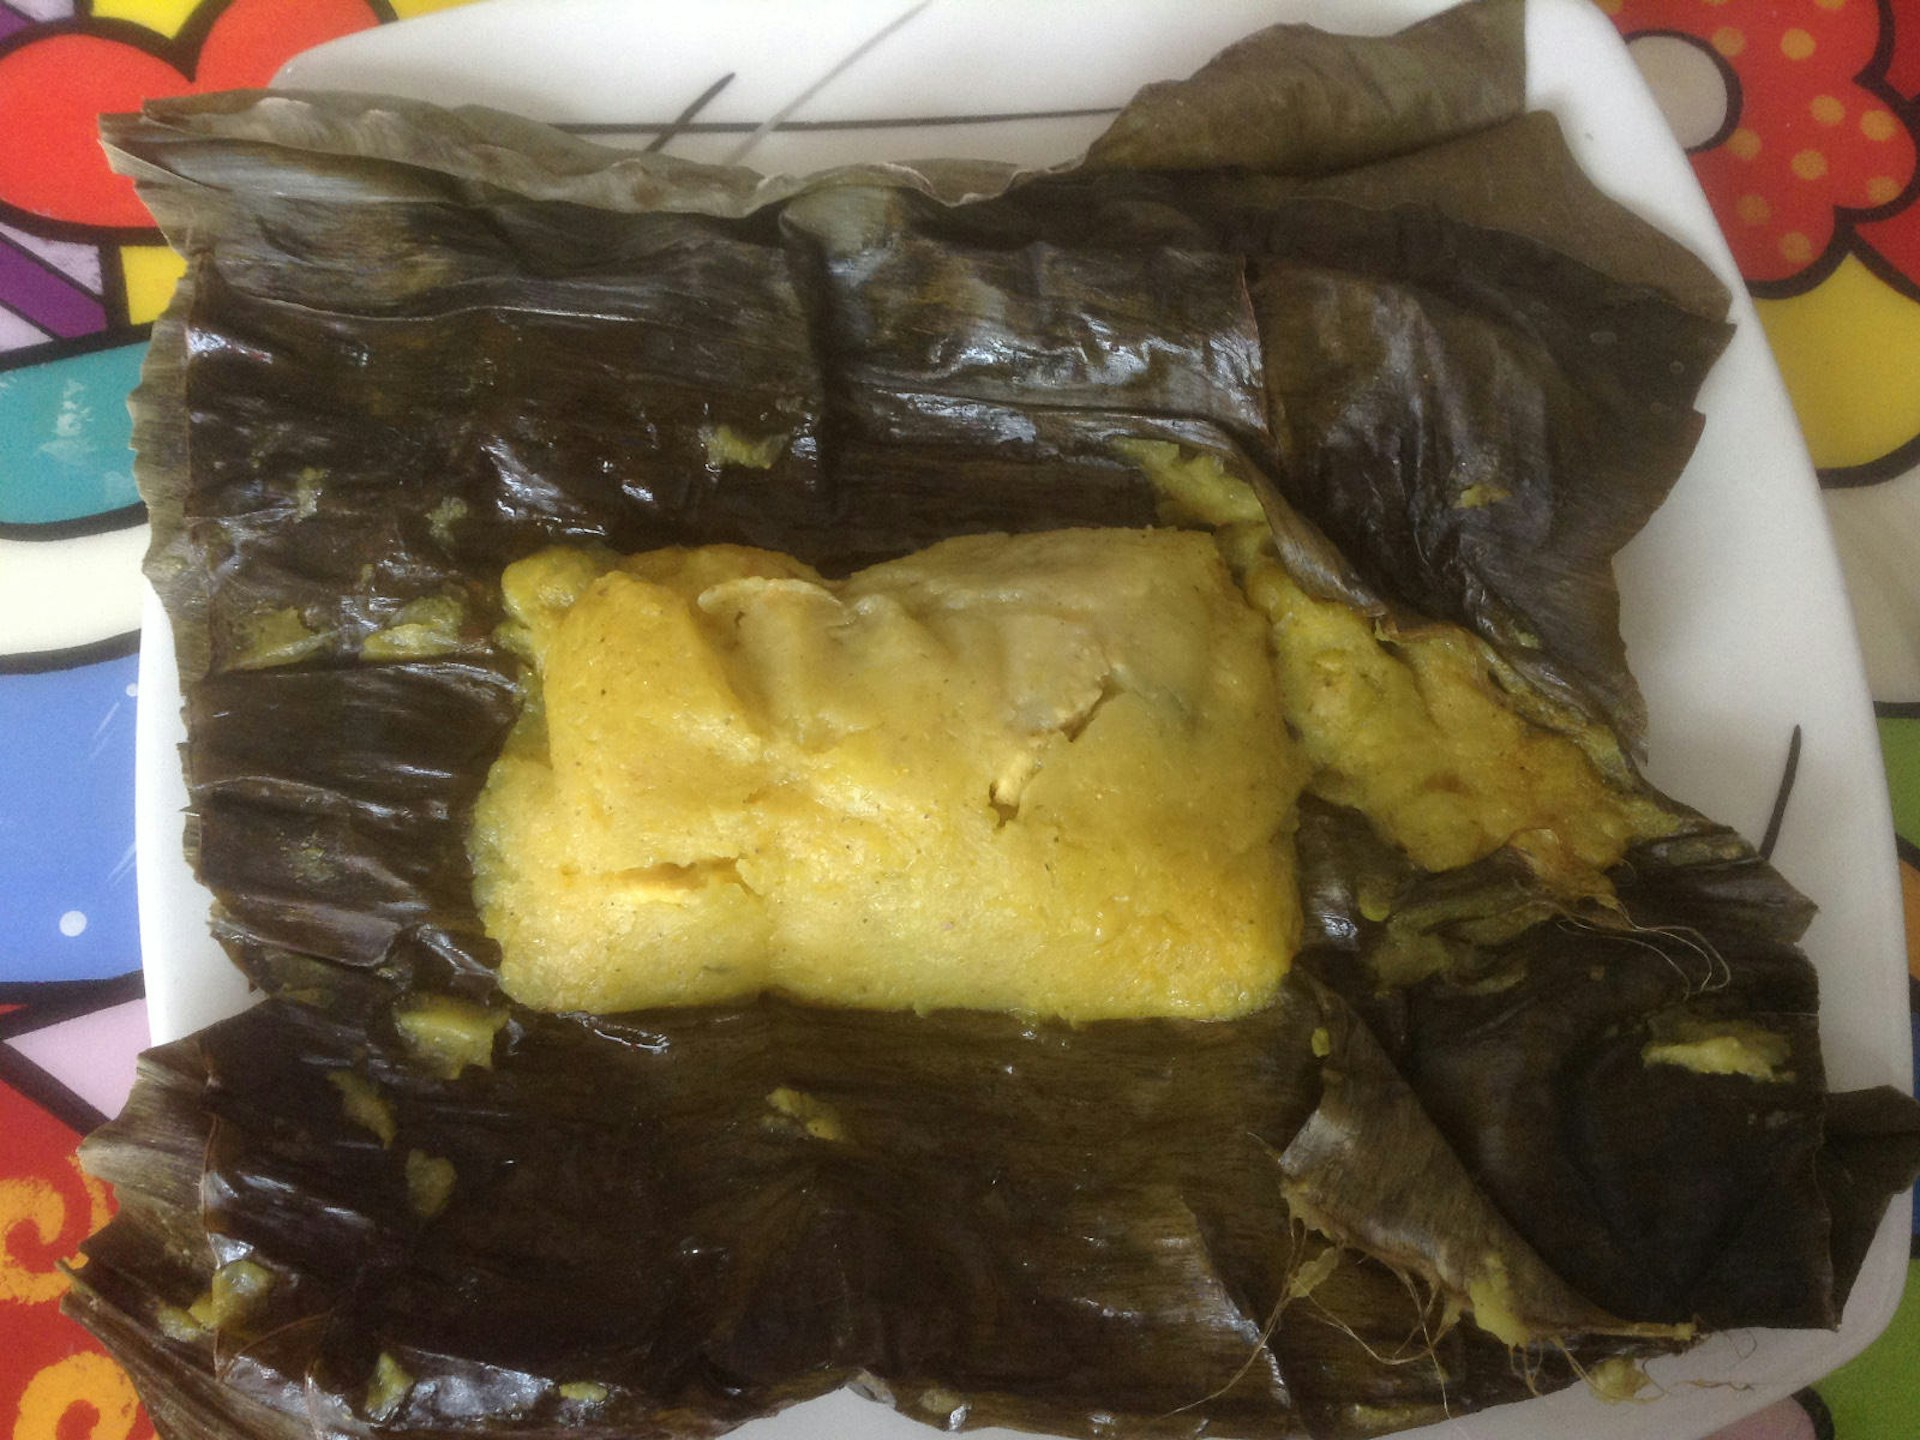 Chicken tamales for breakfast in Bogota © young shanahan / CC BY 2.0